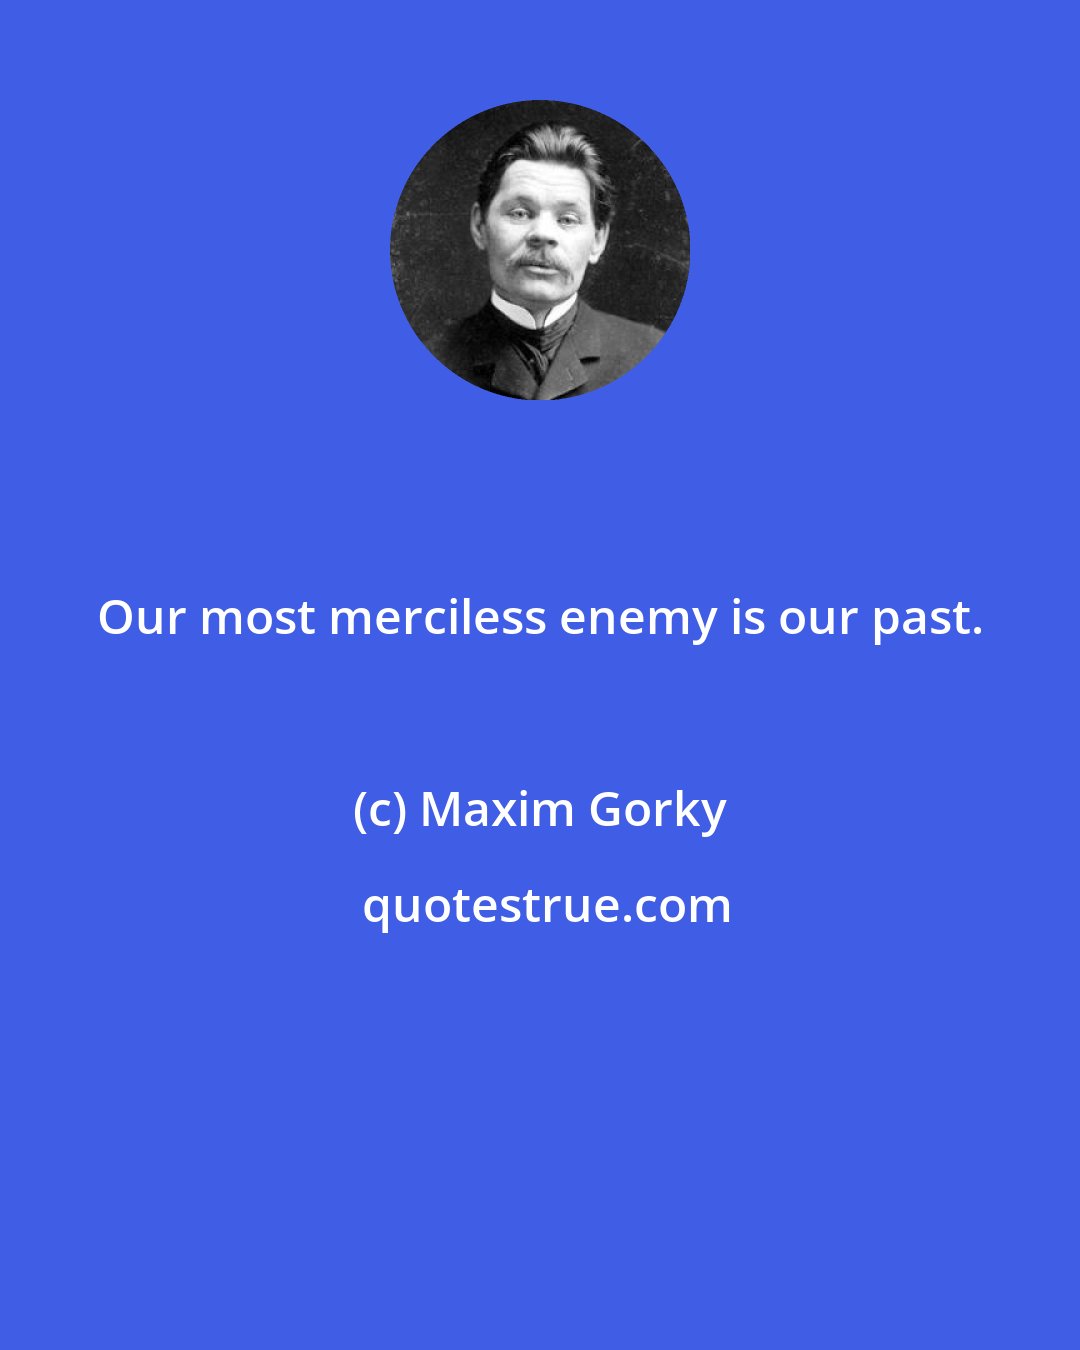 Maxim Gorky: Our most merciless enemy is our past.